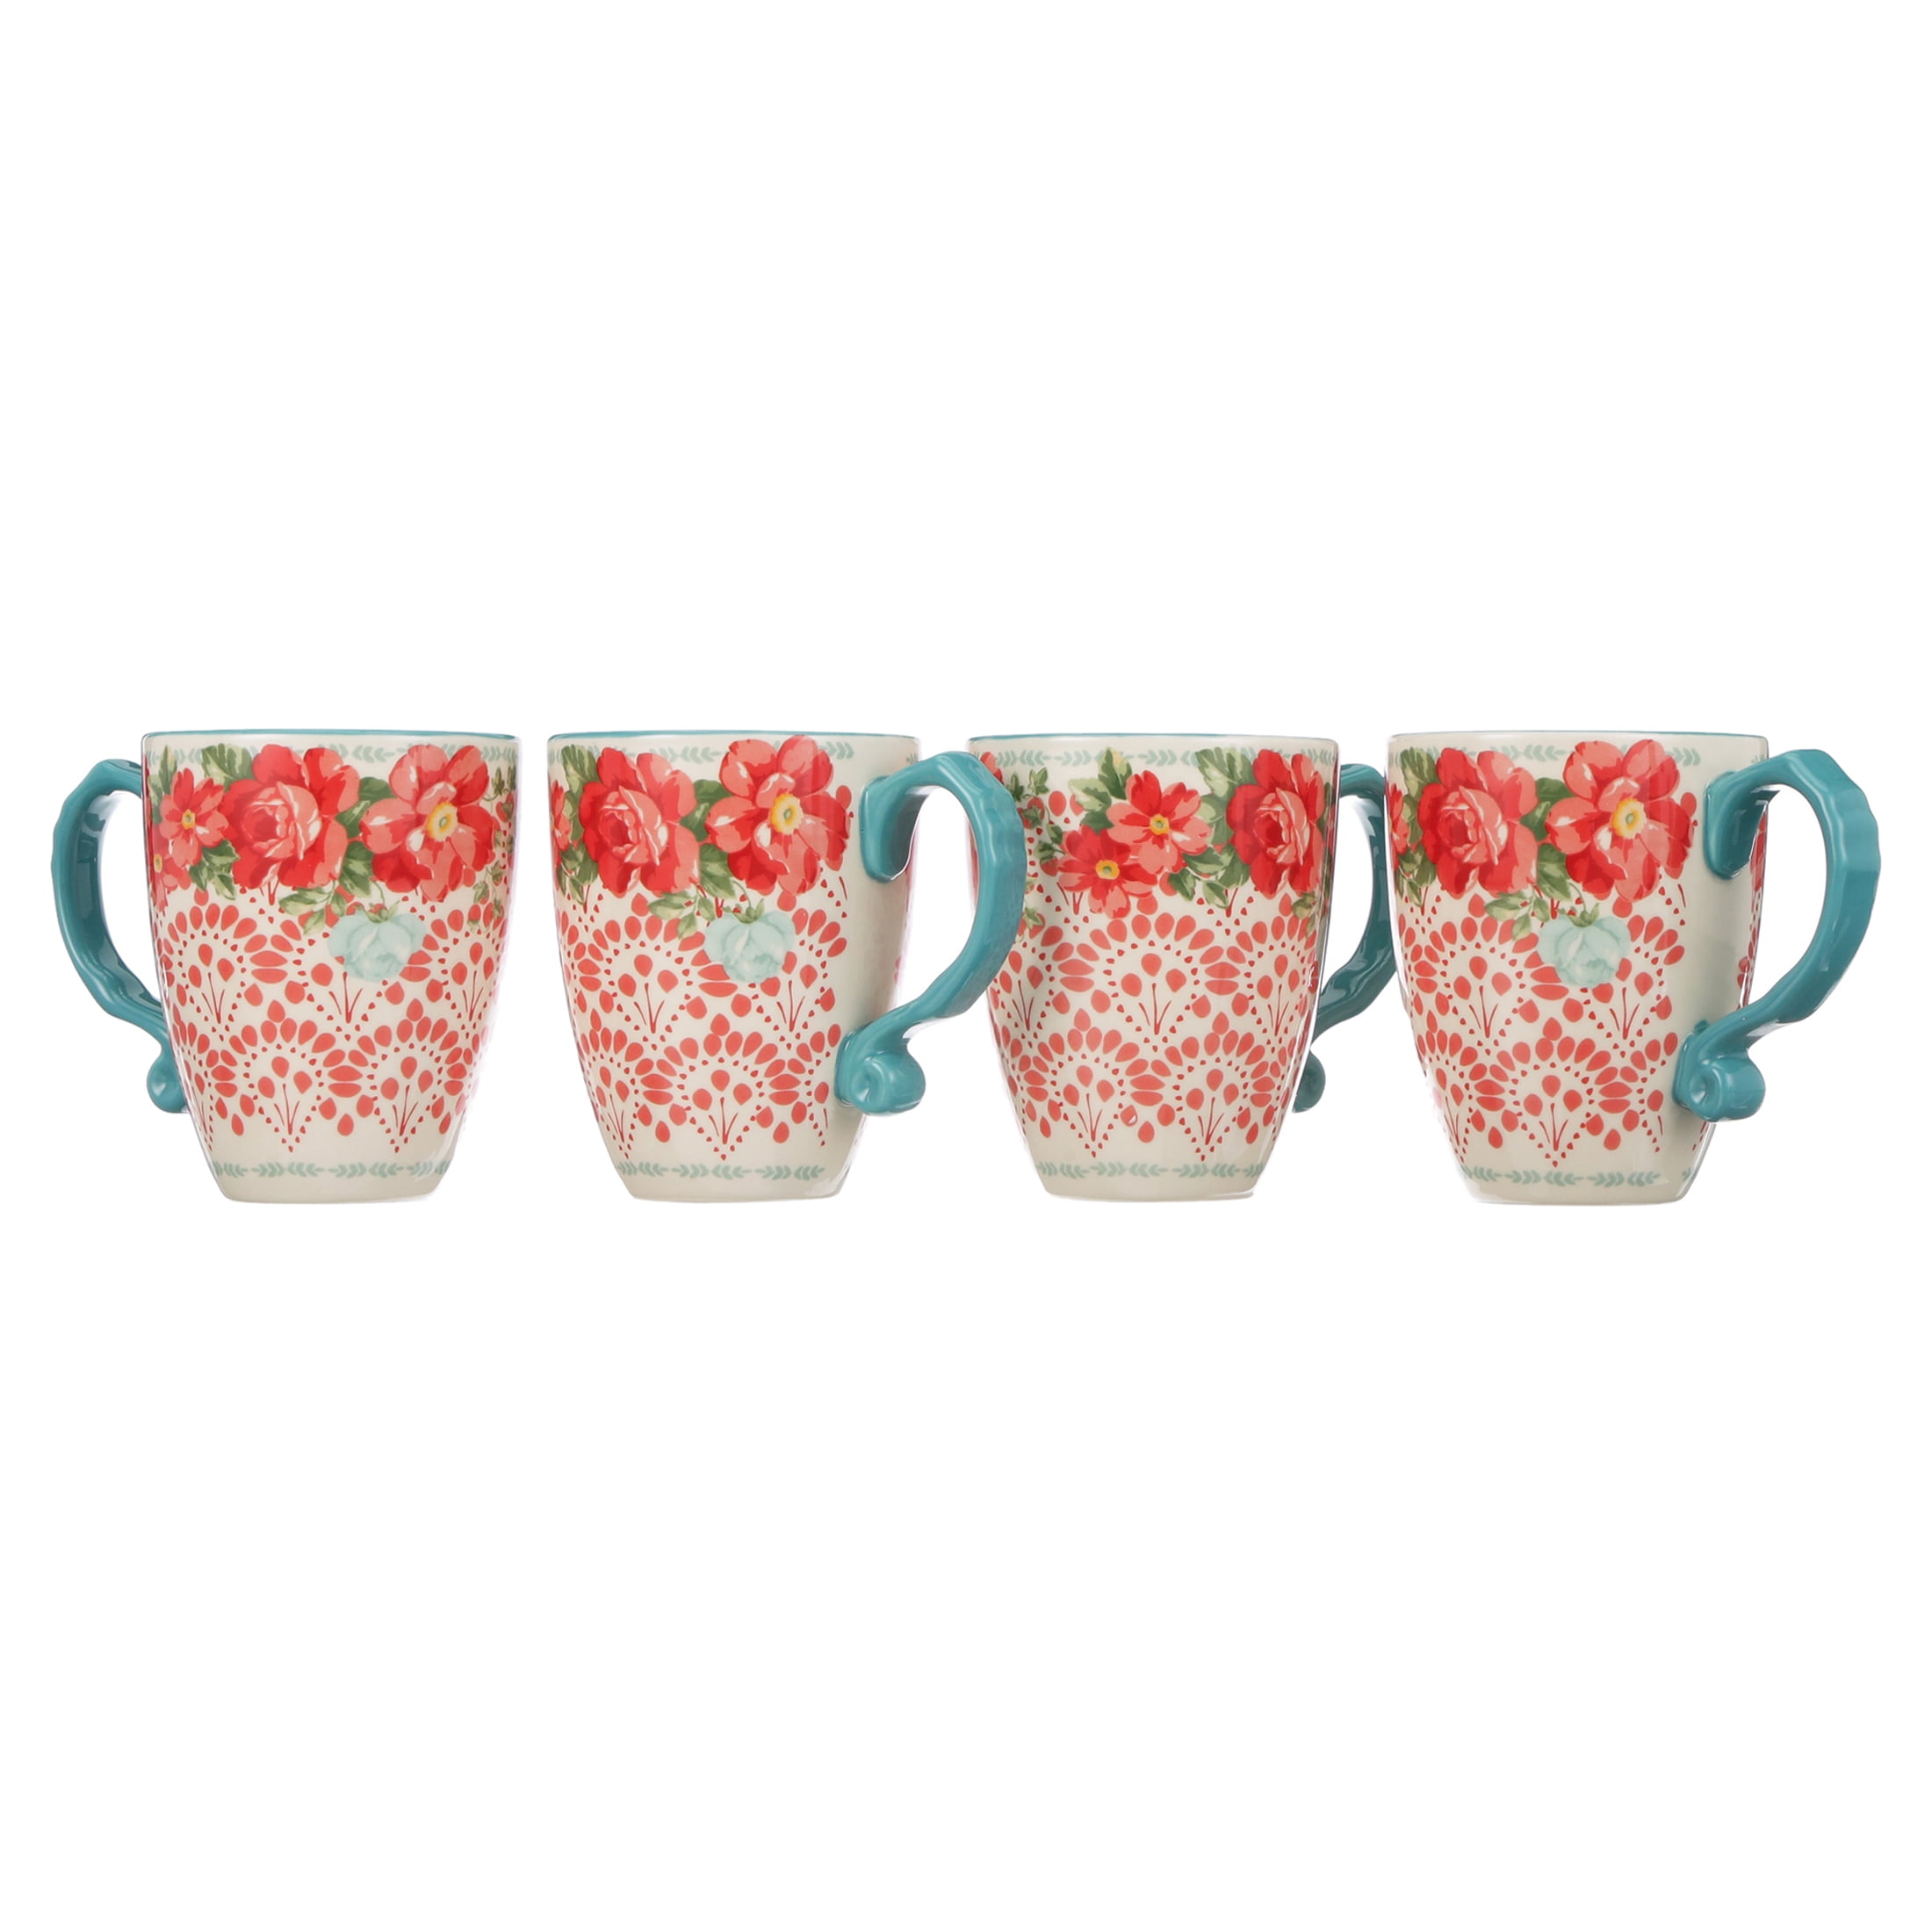 The Pioneer Woman Elegant Vintage Red Floral Blossom 16oz Coffee Cup Set 4-PACK